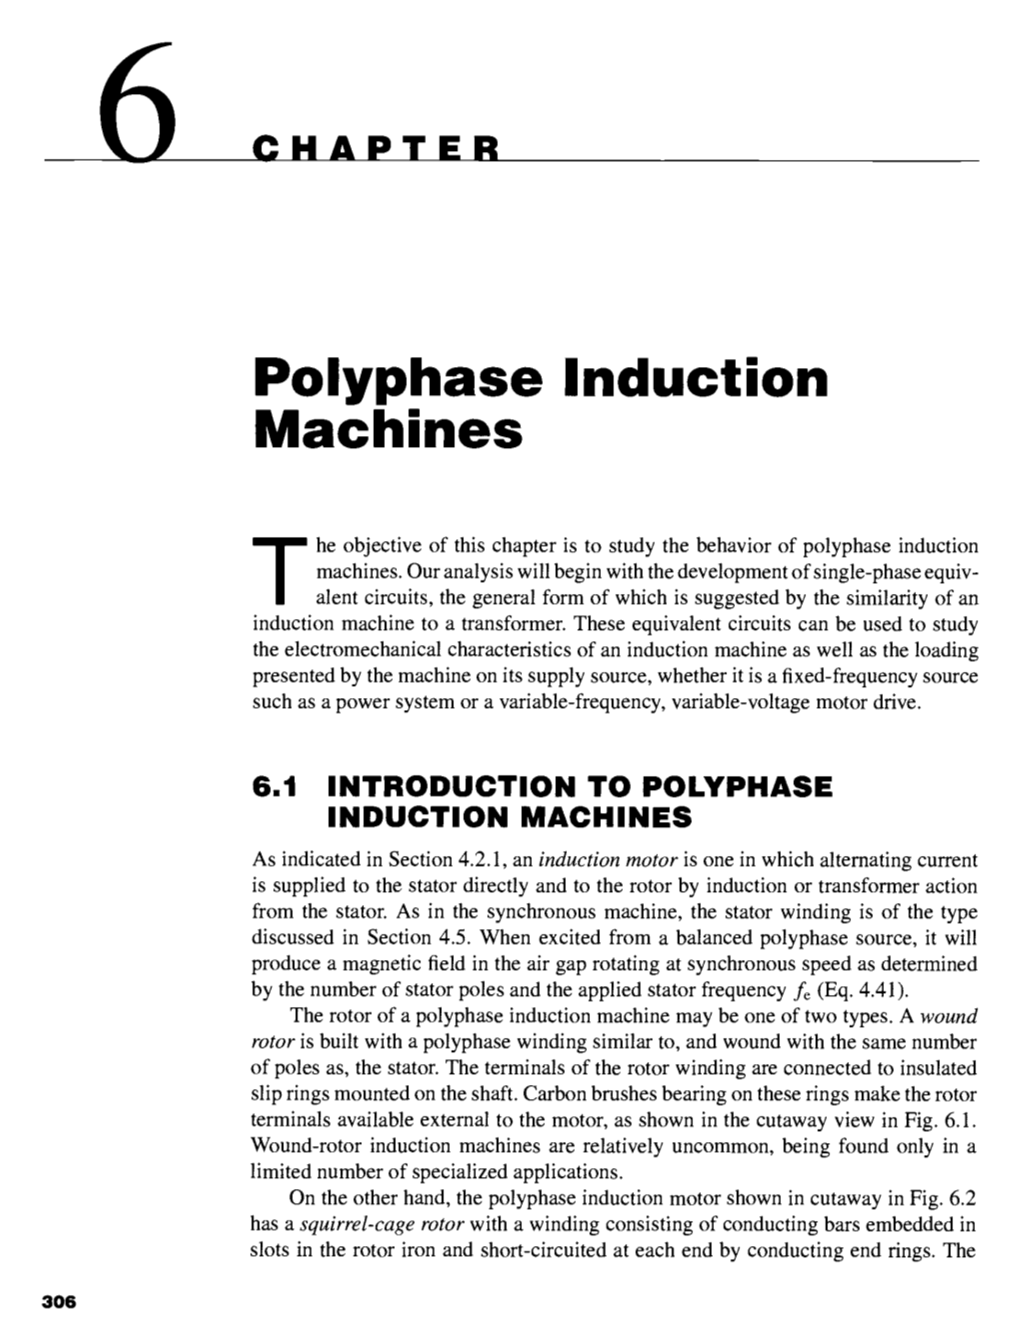 Polyphase Induction Machines